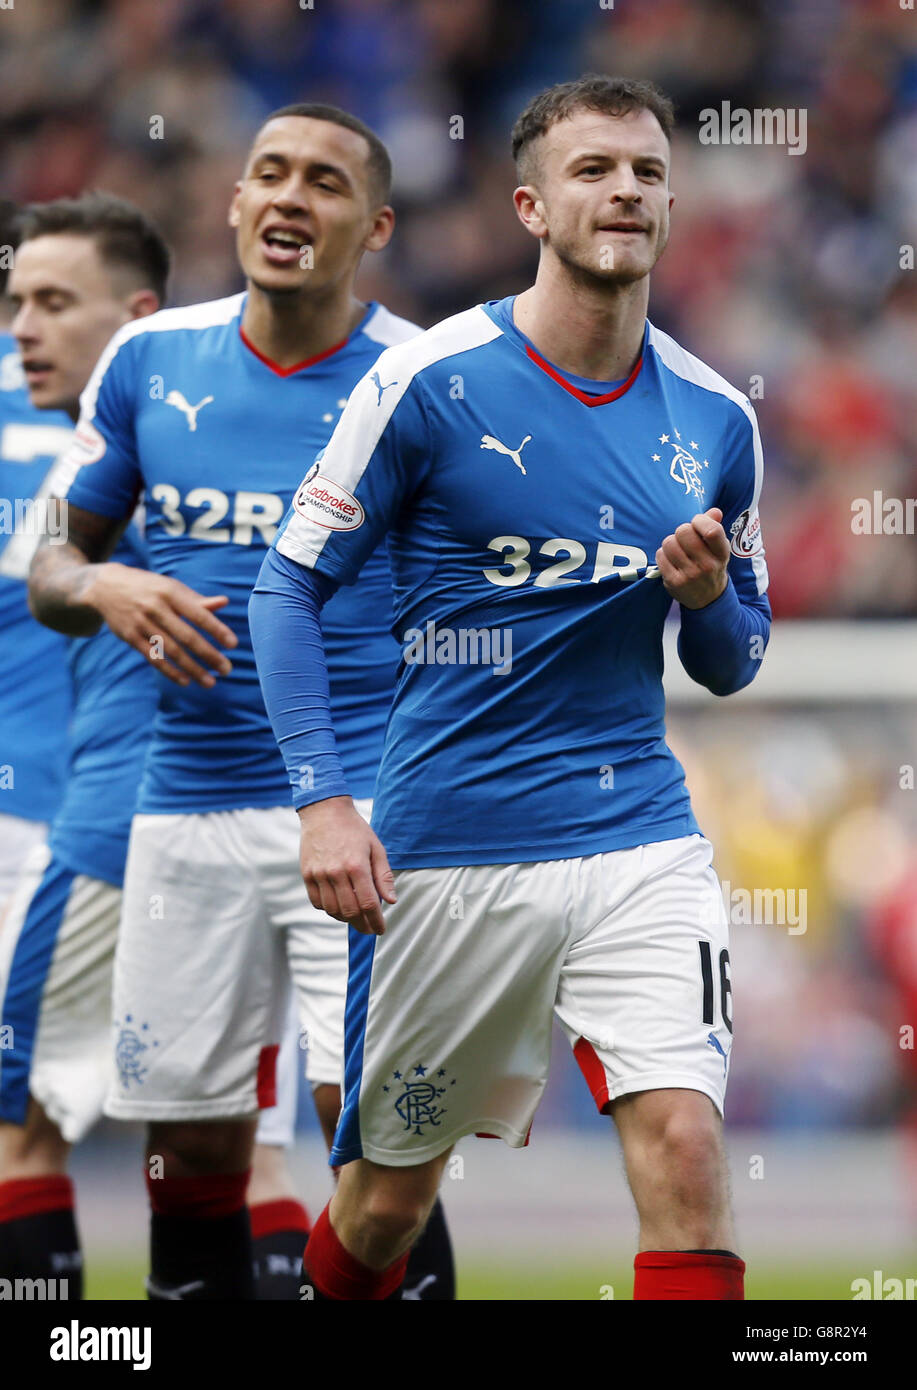 william hill coupland road ibrox reviews